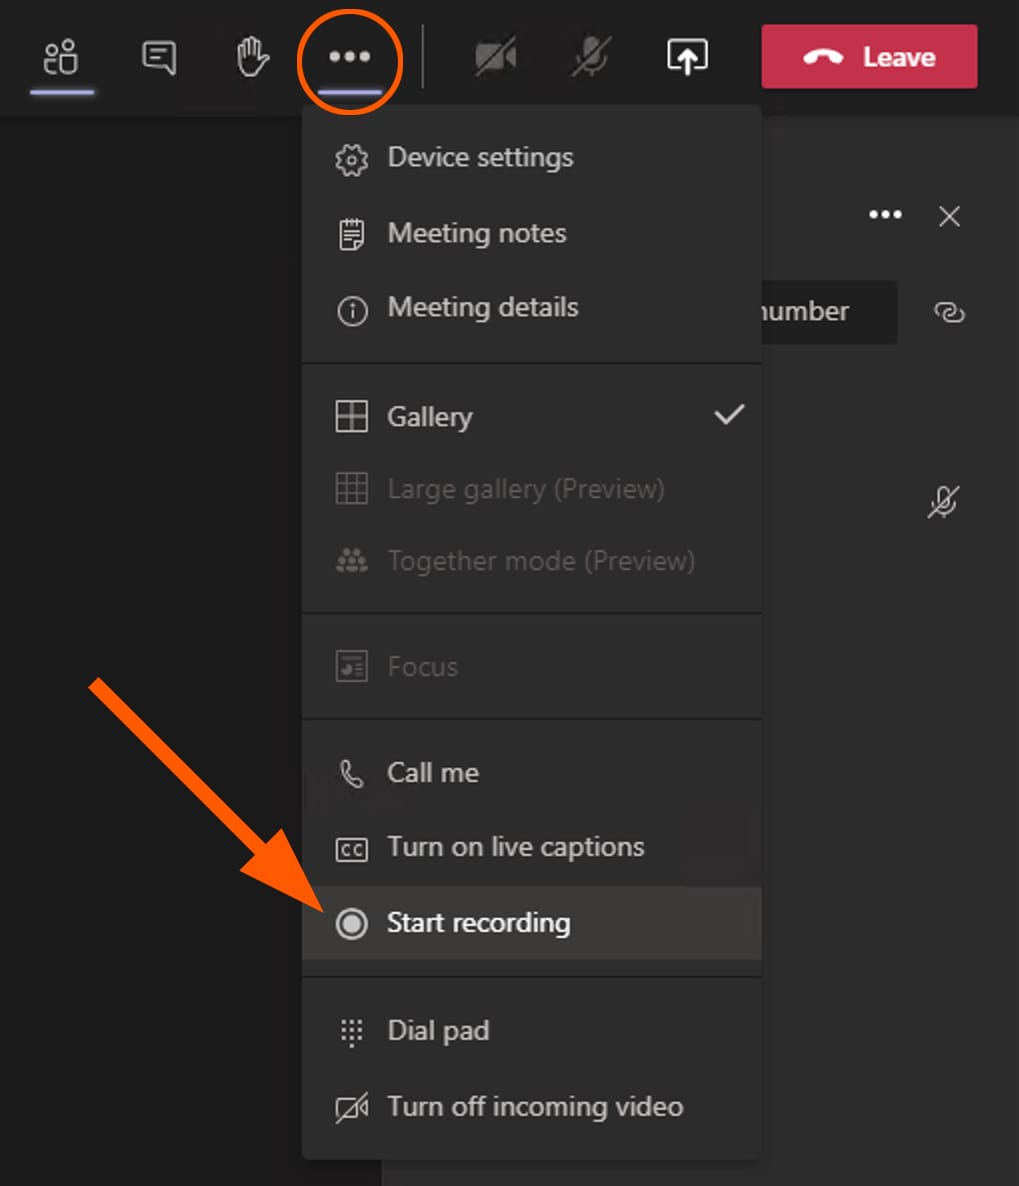 Select More Actions and Start Recording